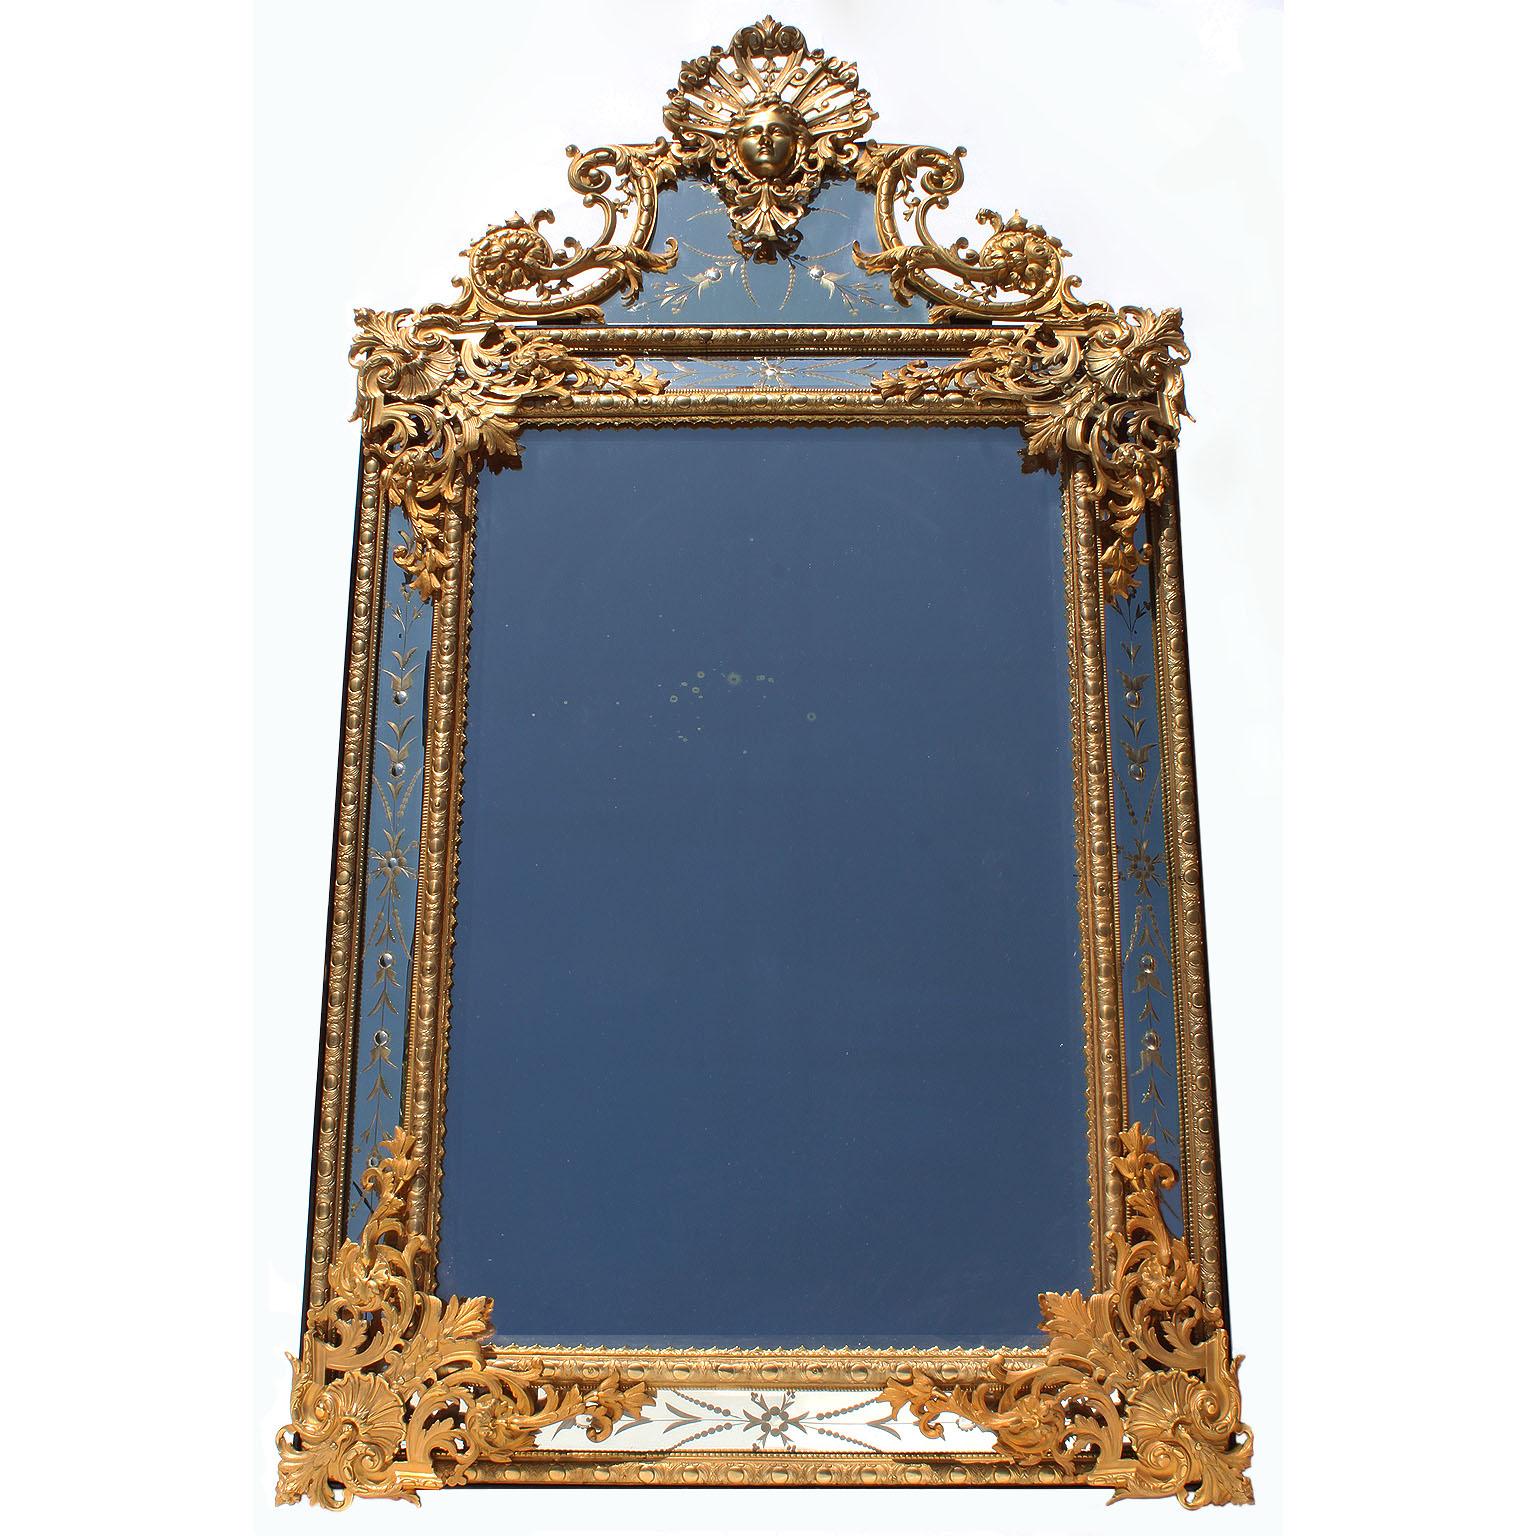 Etched Pair of French 19th-20th Century Louis XIV Style Gilt-Bronze 'Ormolu' Mirrors